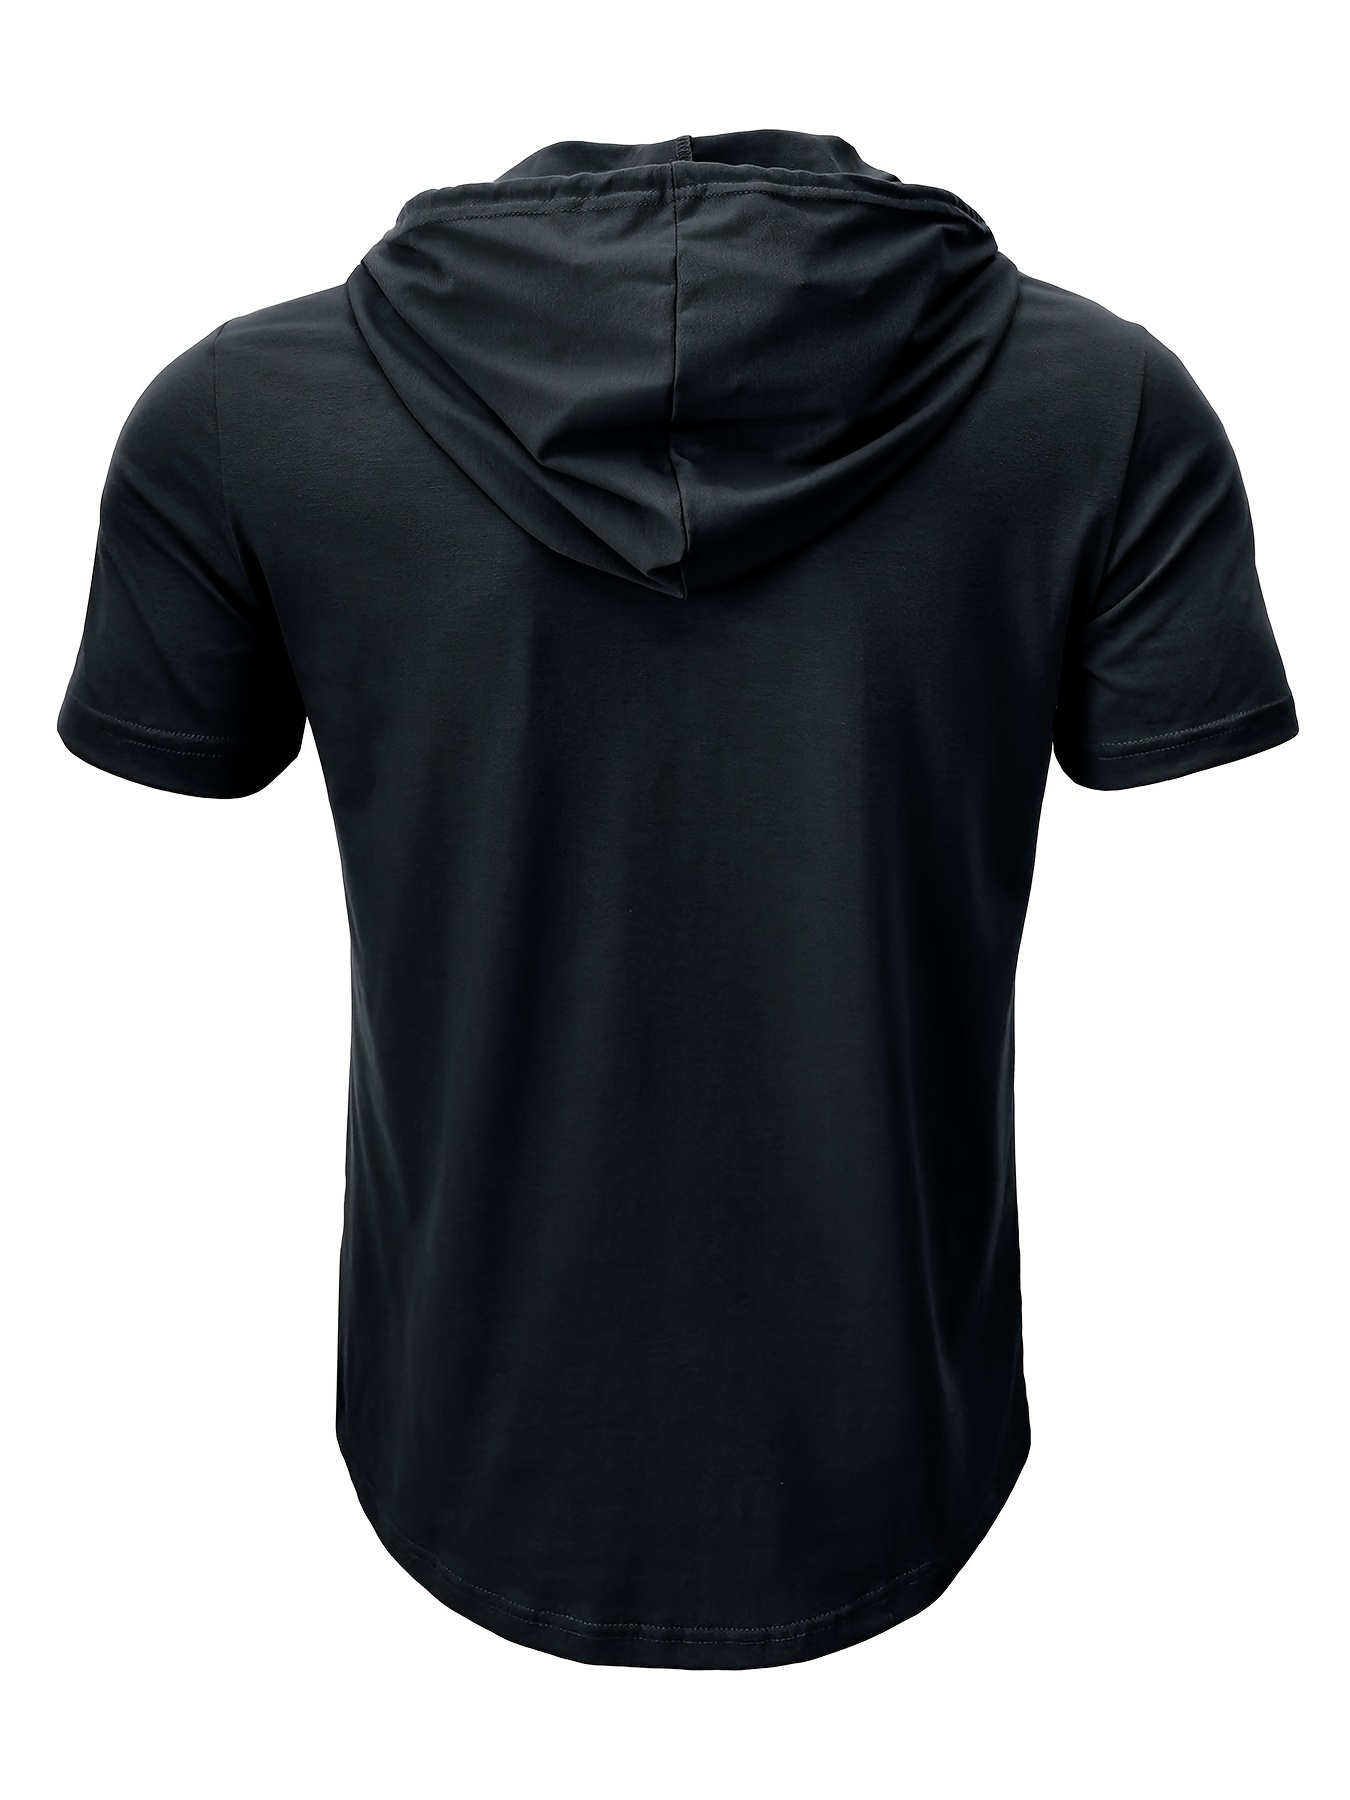 mens solid drawstring hooded short sleeve sports t shirt mens cotton blend henley top for summer outdoor details 9